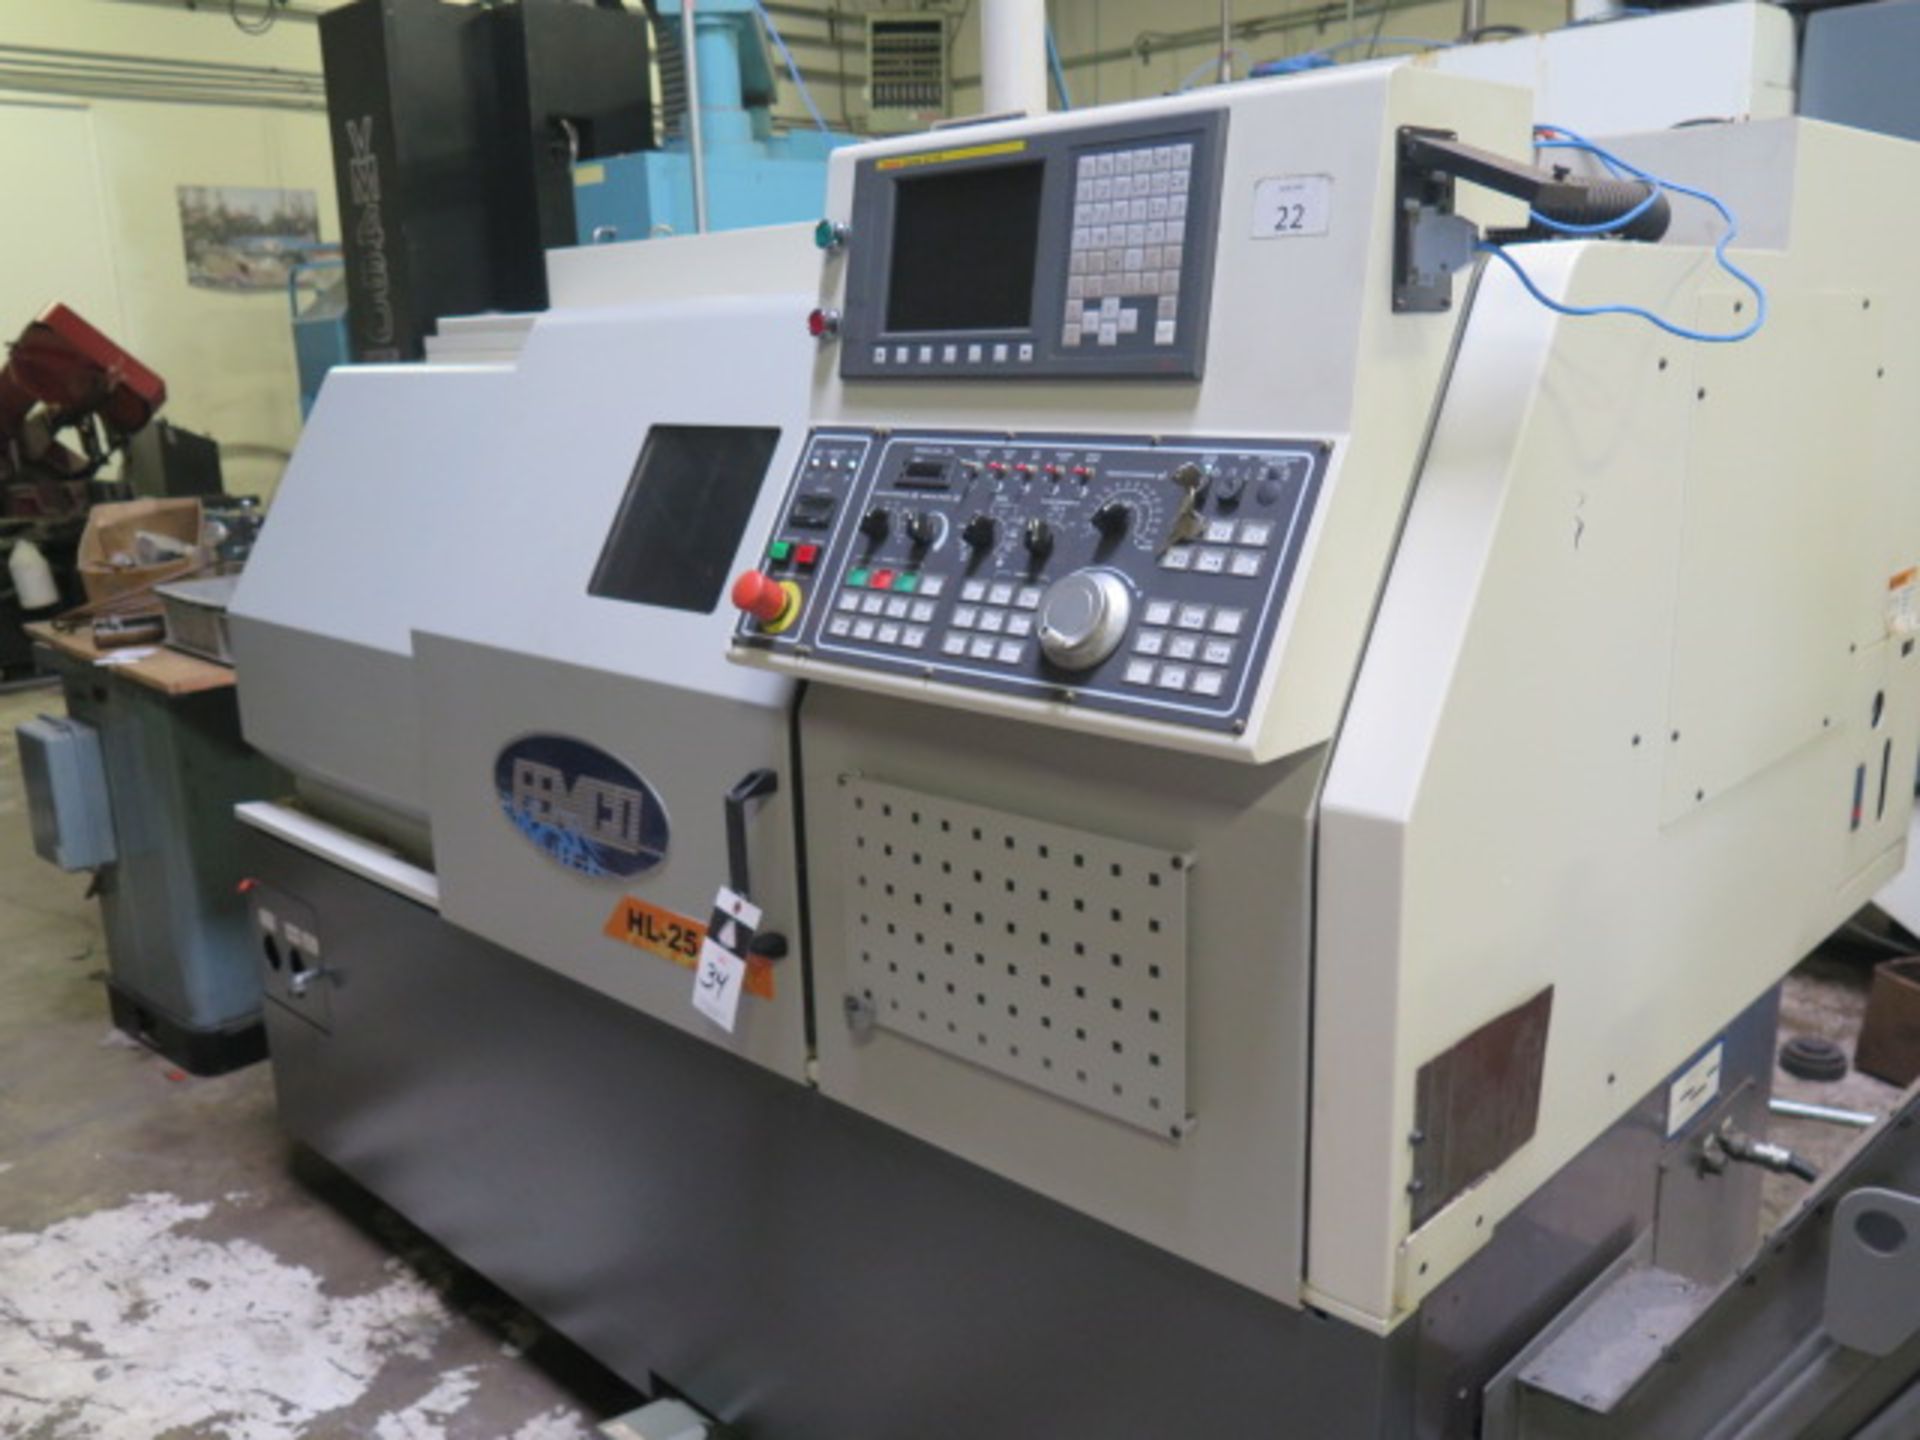 2014 Femco HL-25N CNC Lathe r s/n L114-2104 w/ Fanuc 0i-TD Controls, Tool Presetter, SOLD AS IS - Image 3 of 14